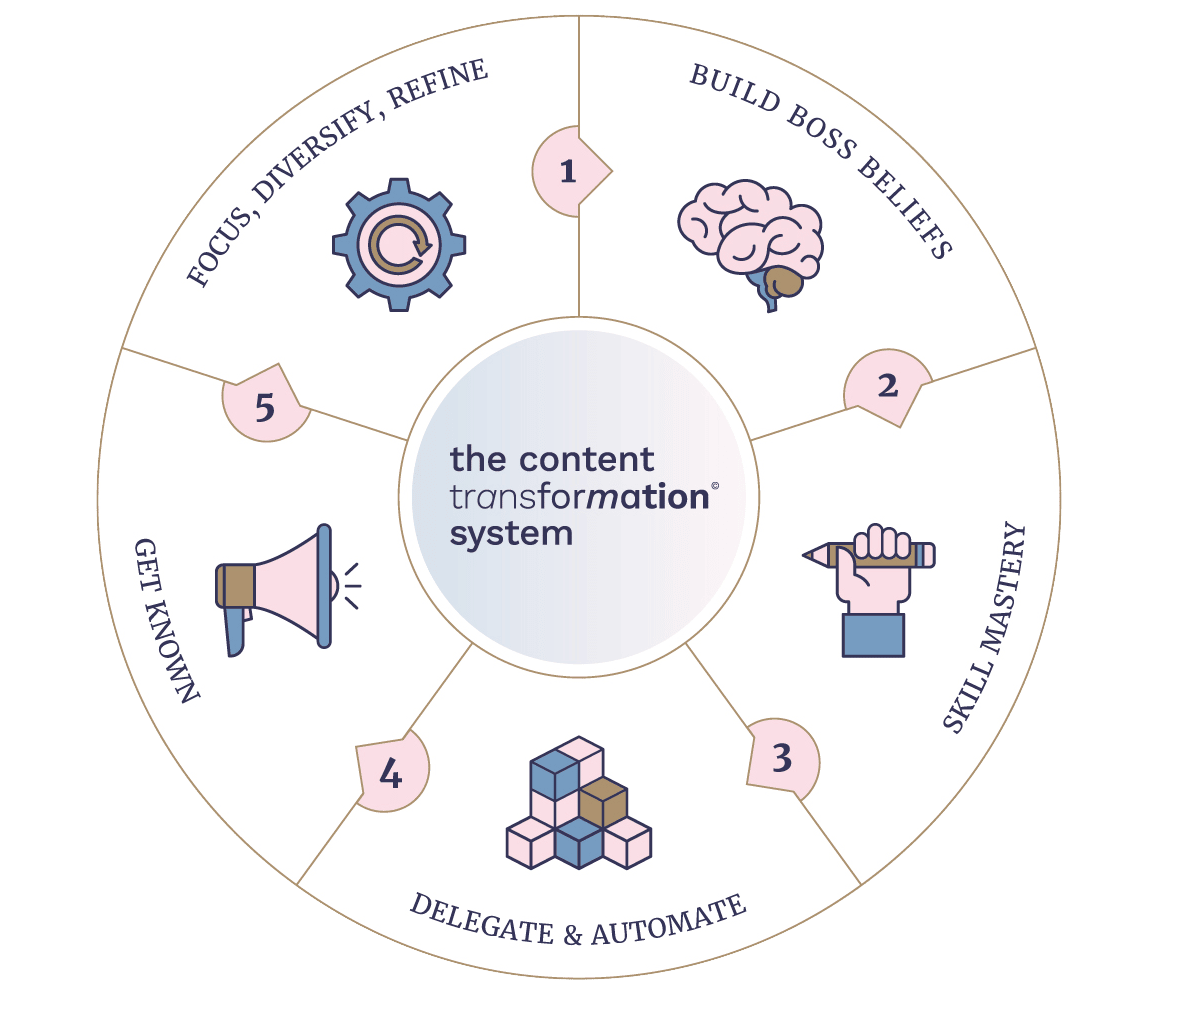 content transformation system